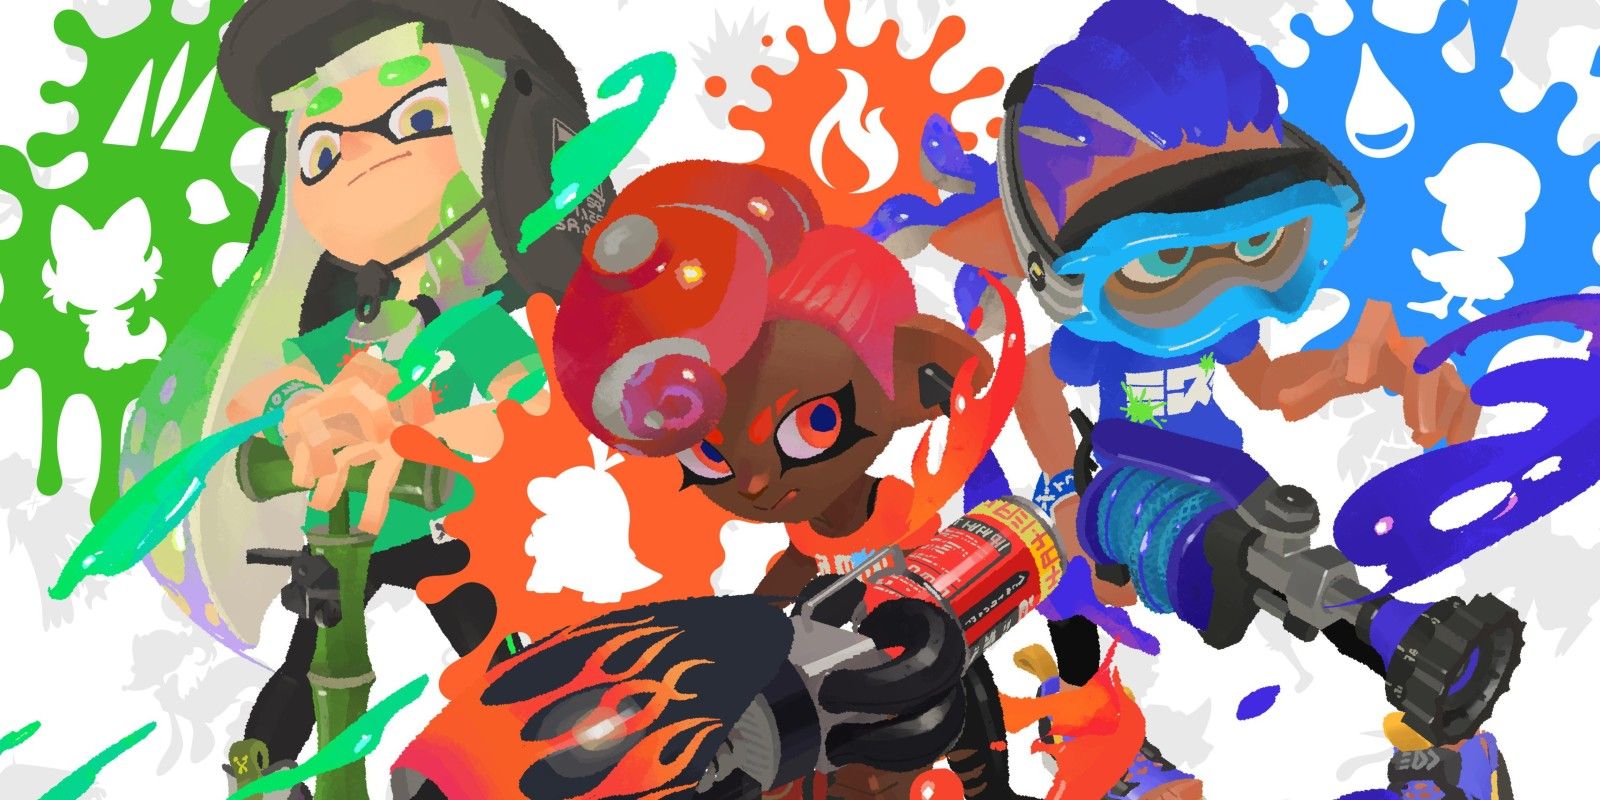 Art for Splatoon 3's Pokémon Scarlet & Violet Splatfest. Inklings and Octolings each sport their own color related to one of the new Pokémon starters.